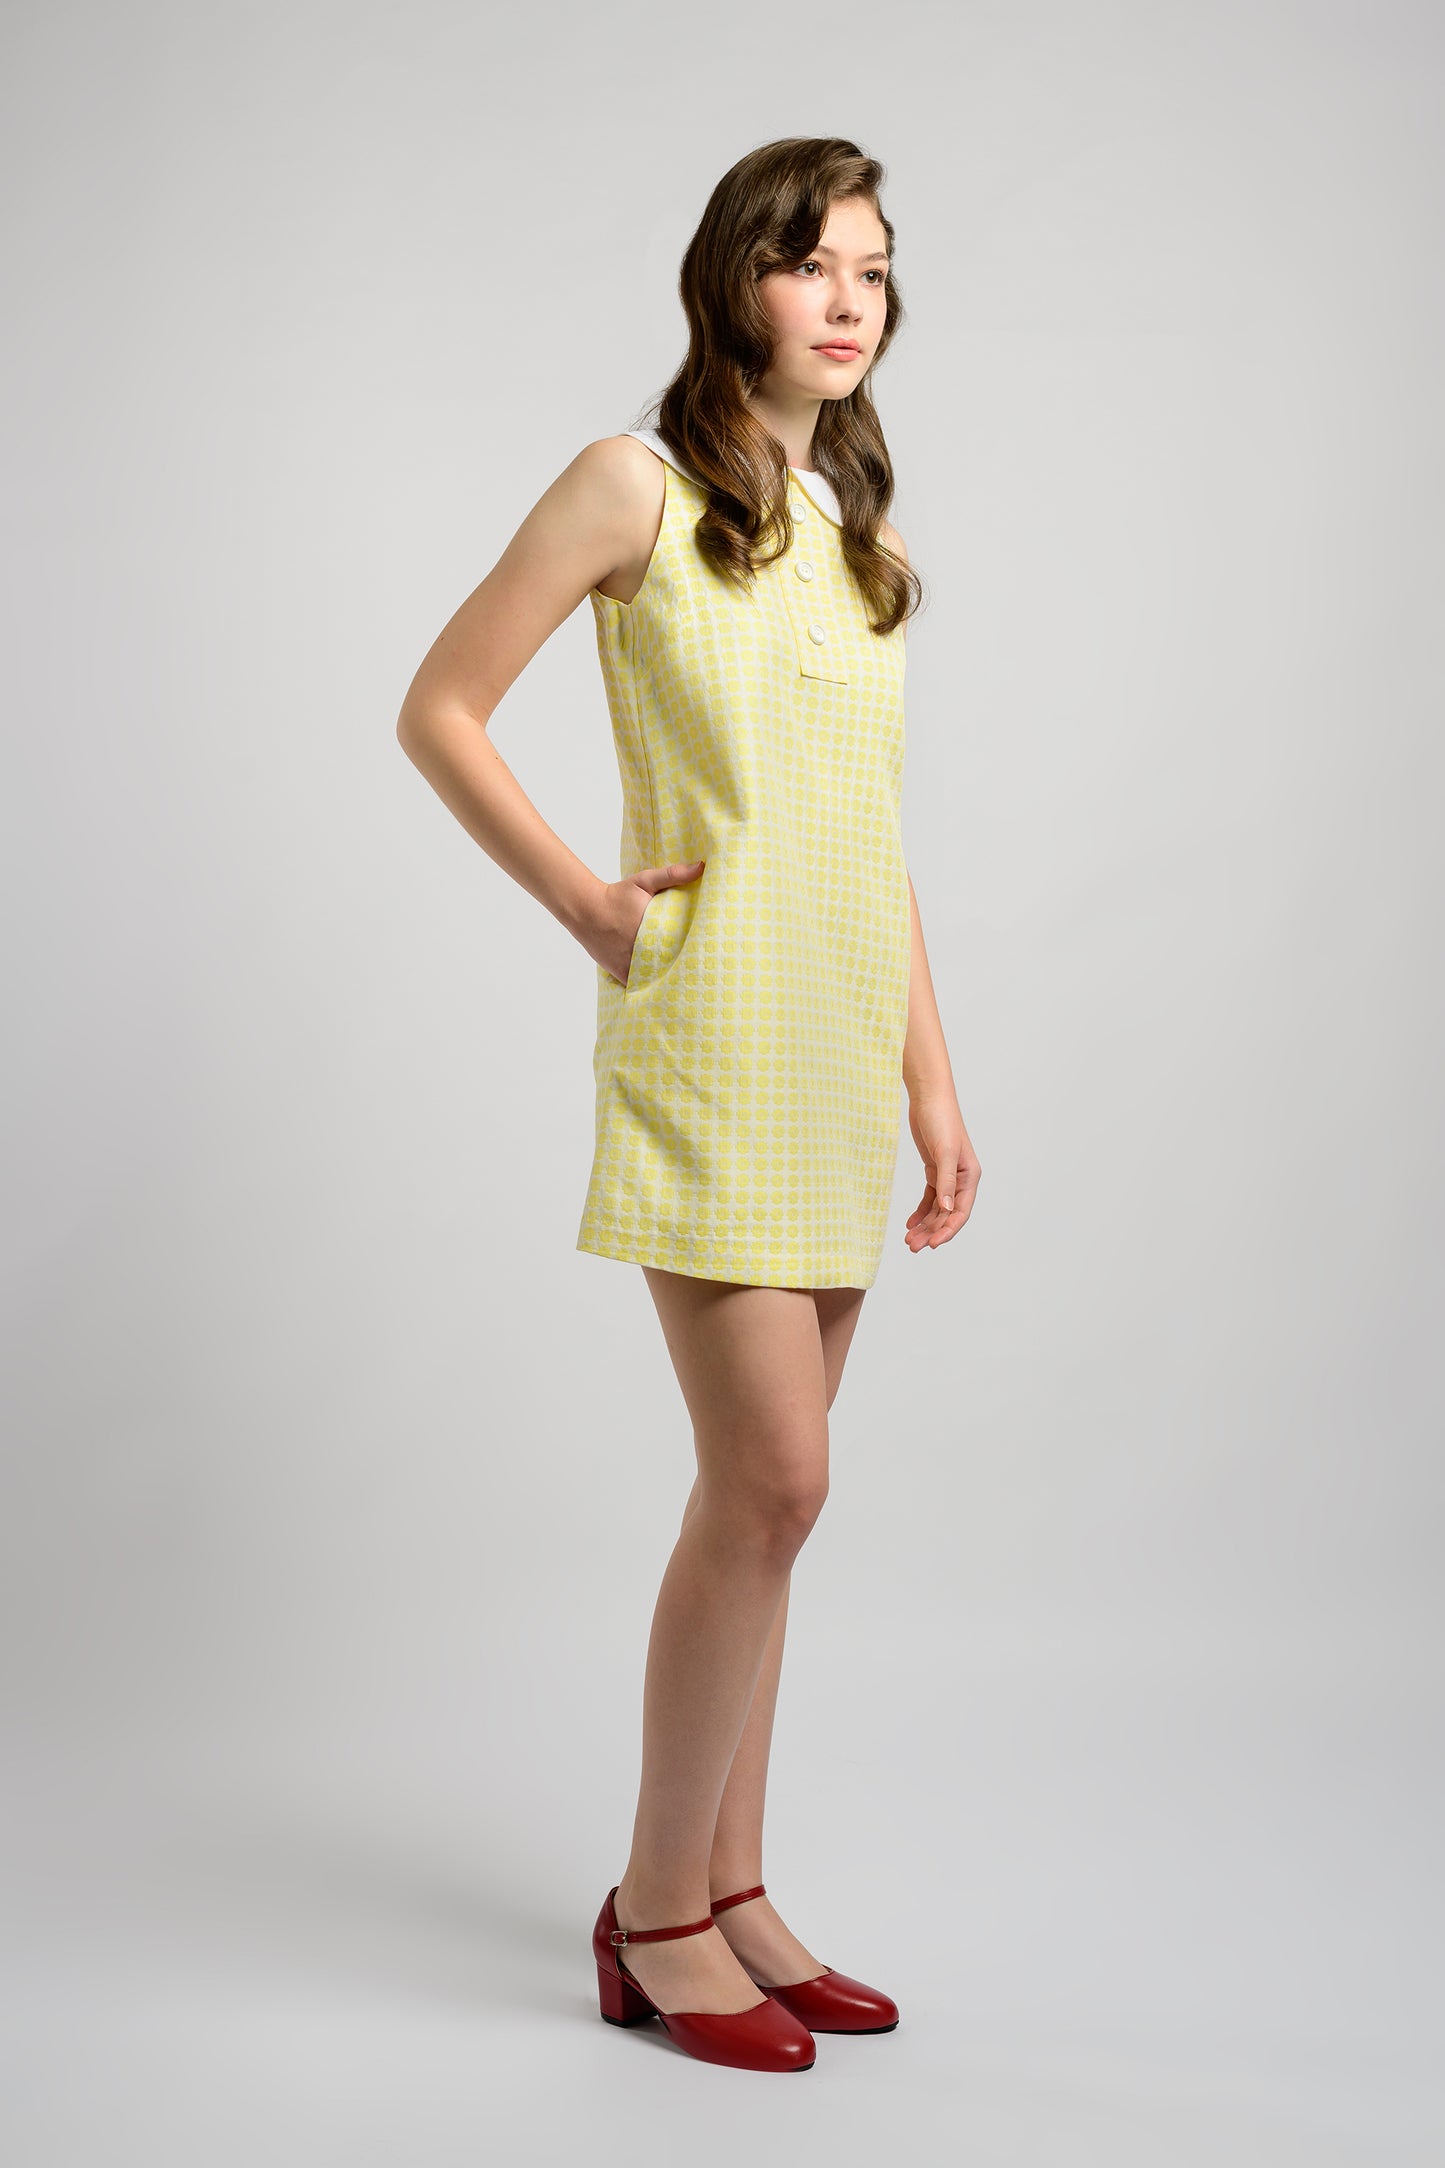 Contrast Collar Shift Dress - Canary Yellow